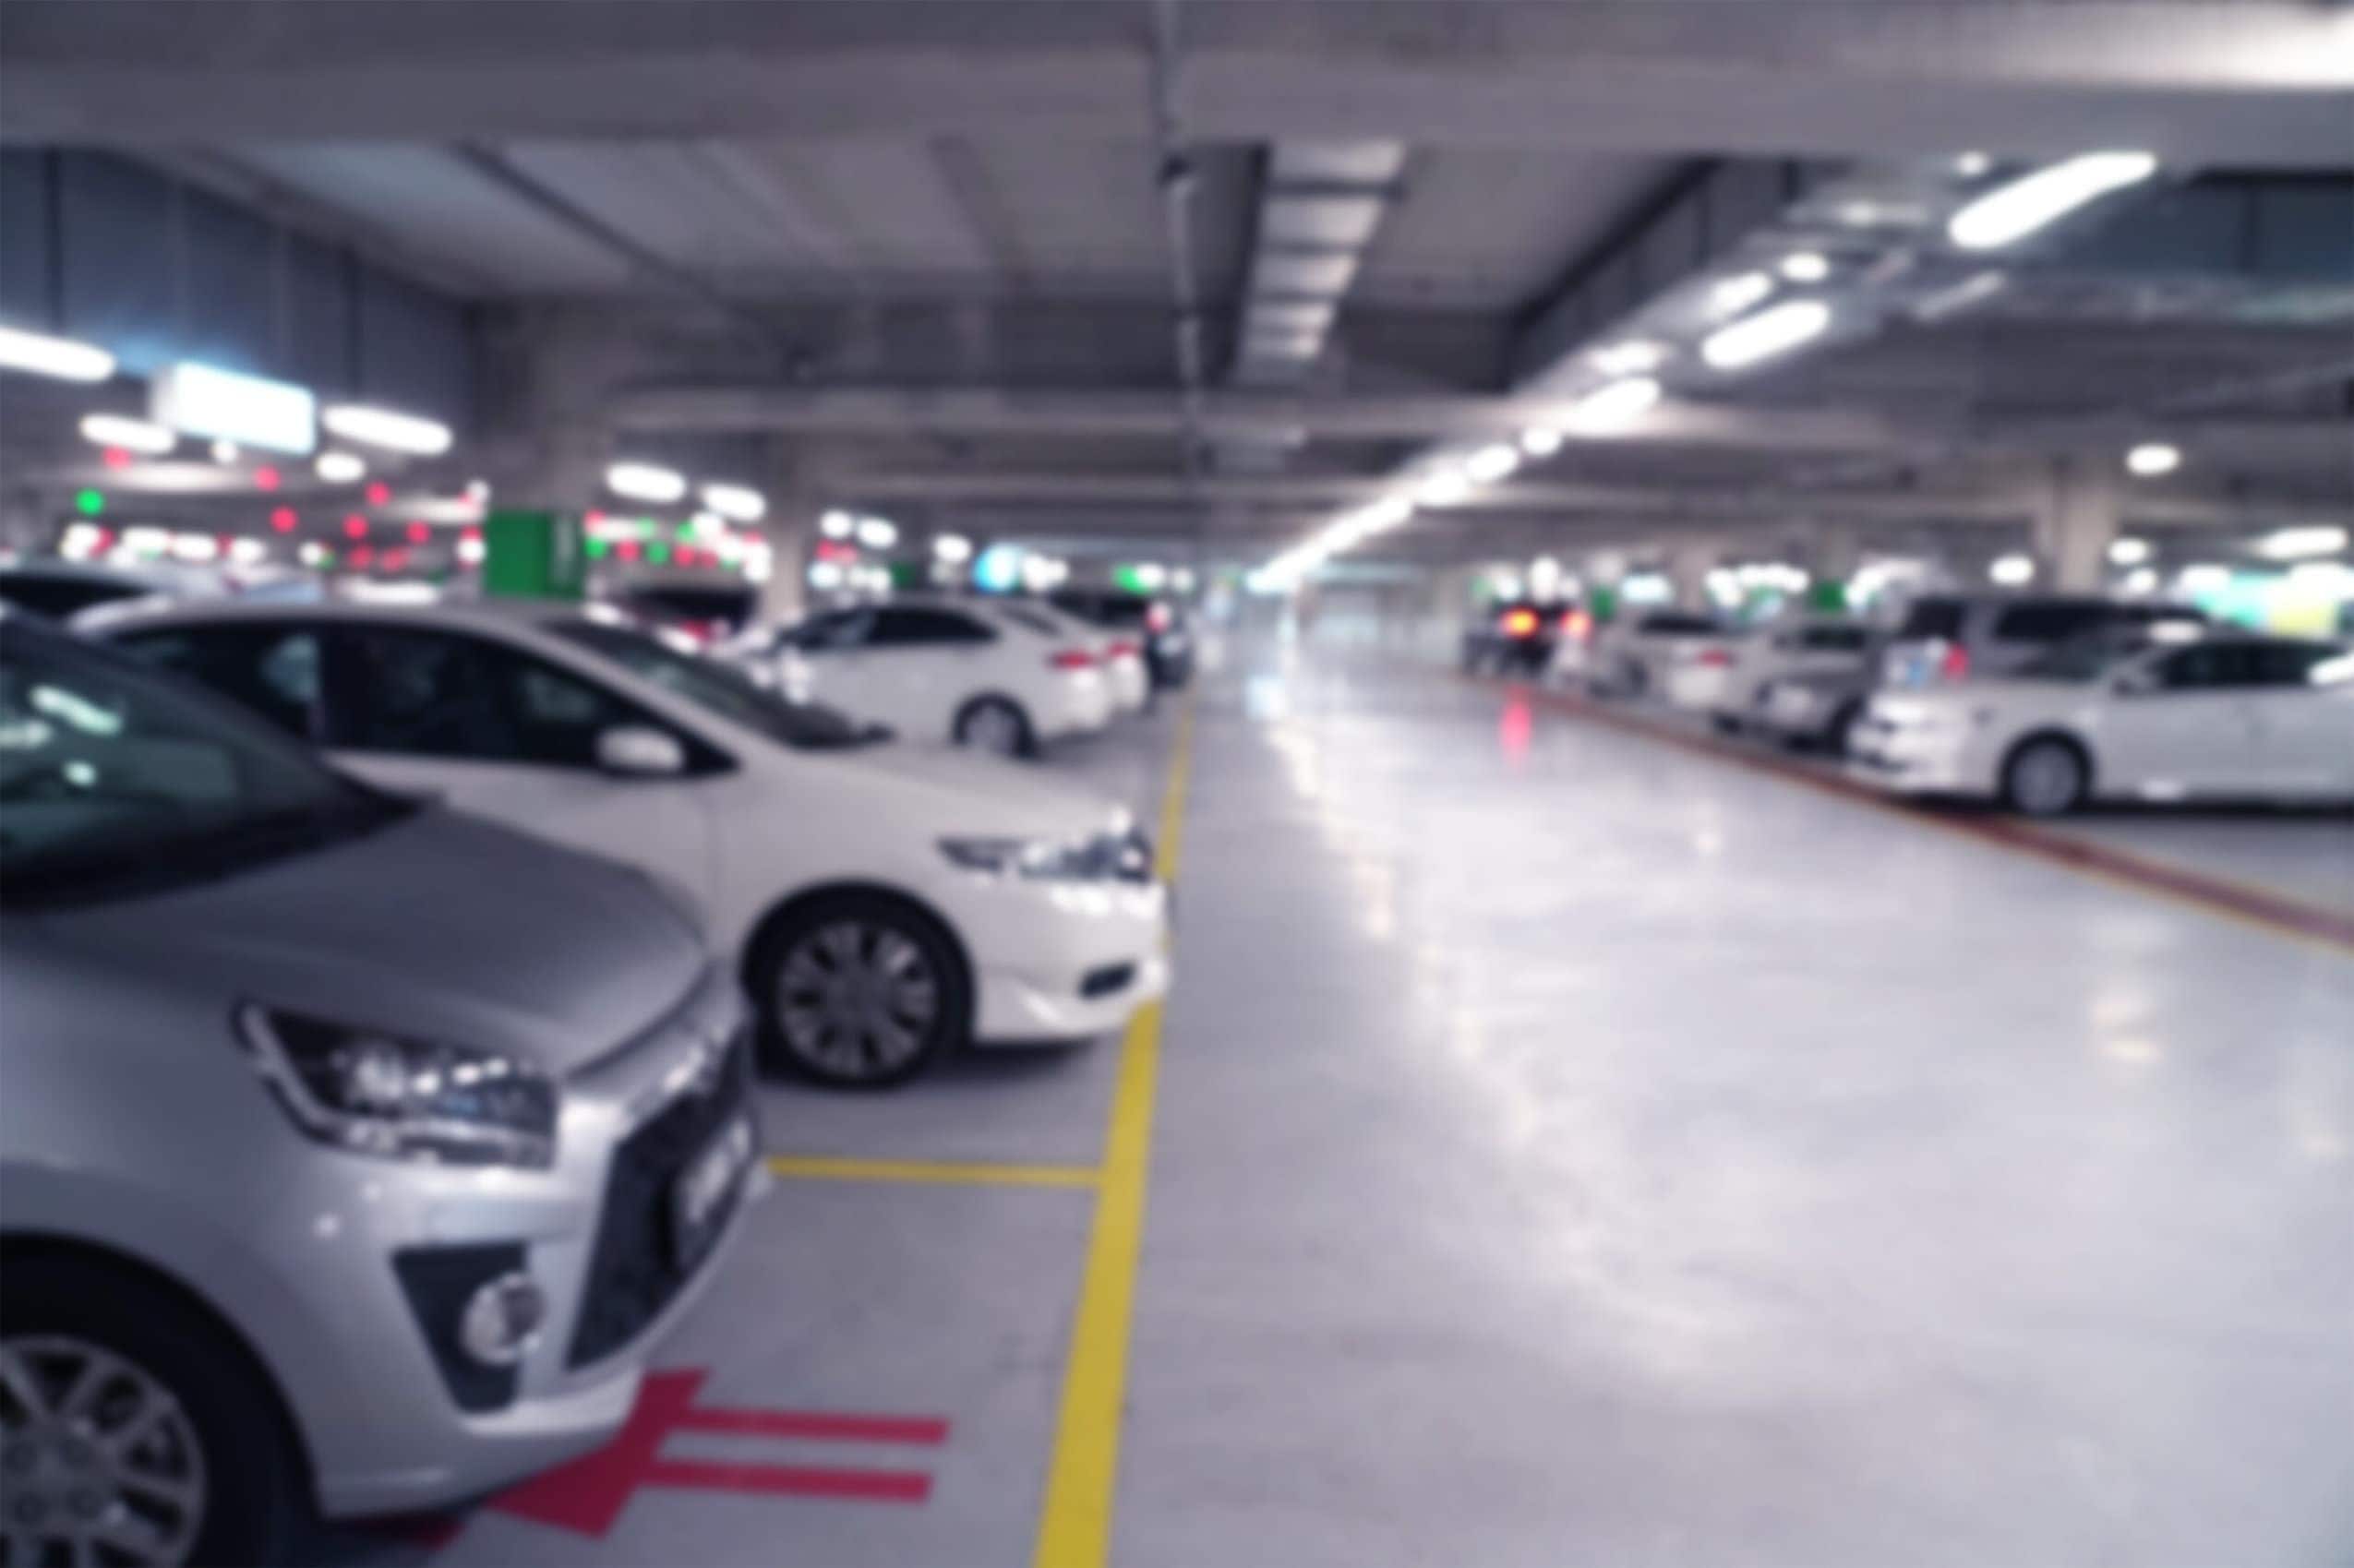 EV charging management for workplaces